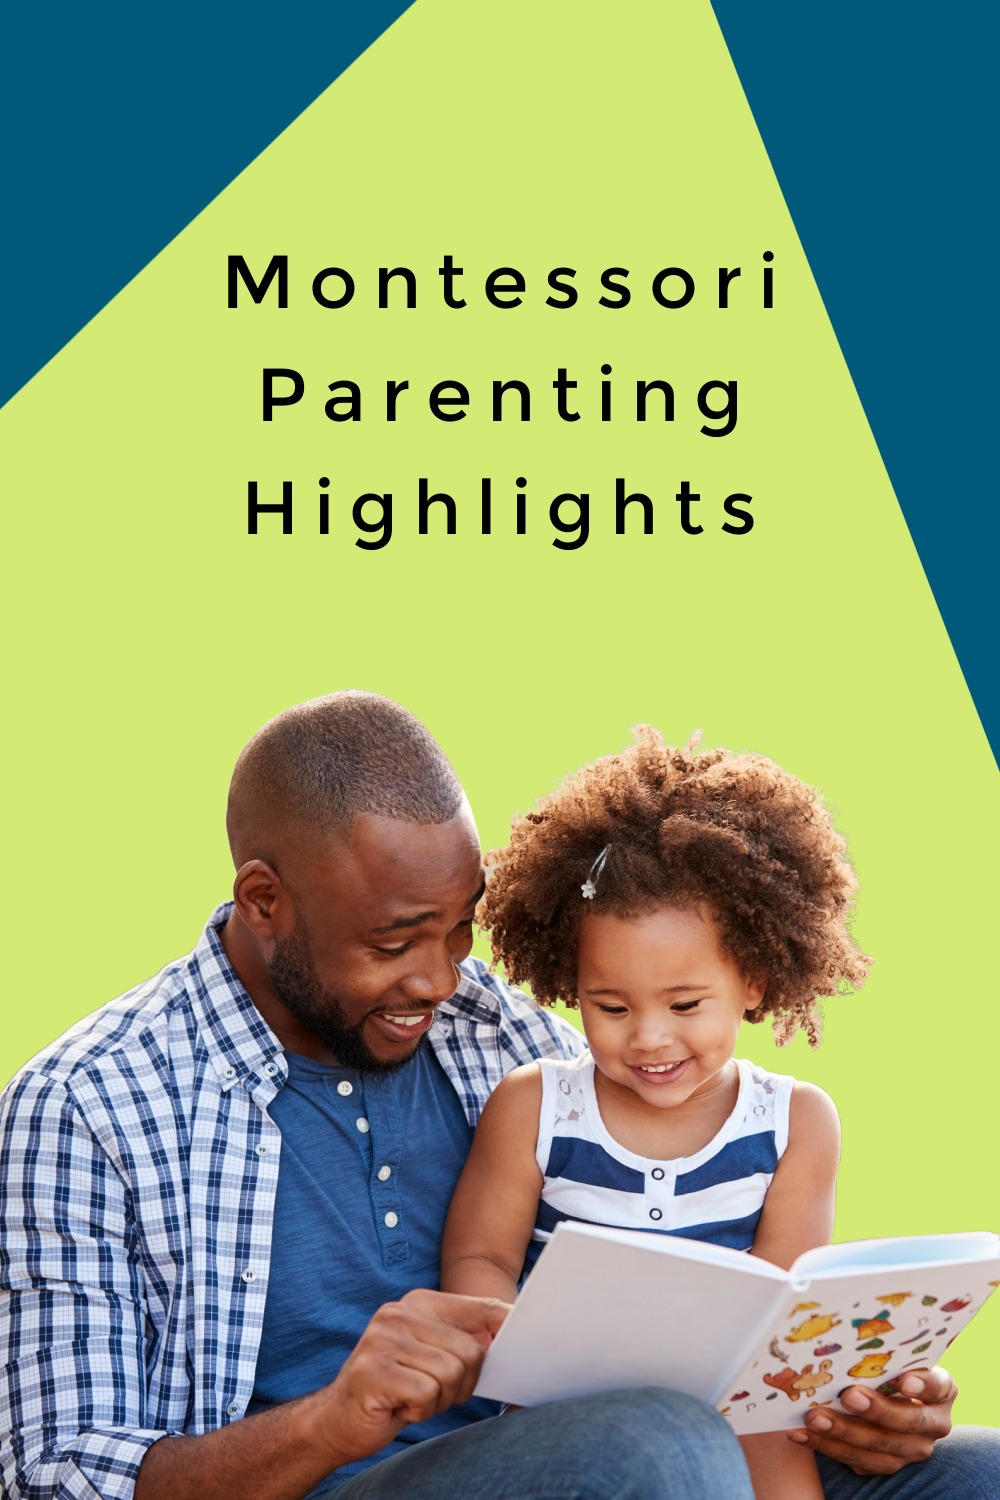 In this Montessori parenting podcast, we're sharing some personal highlights about using Montessori at home and why you should bring Montessori home.